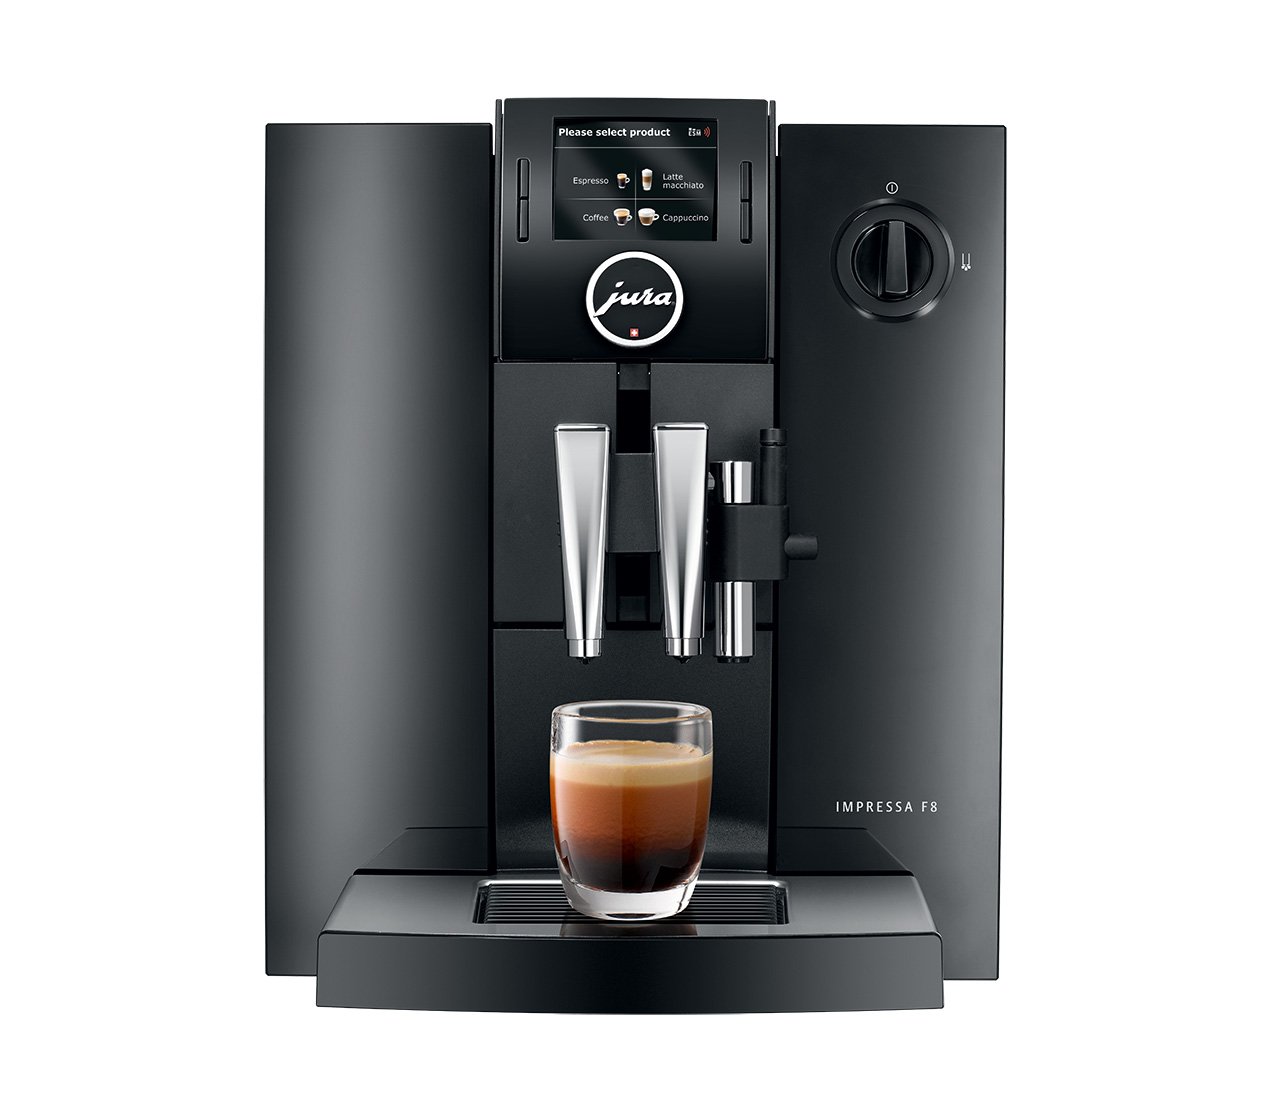 Hire or rent Coffee / Espresso Machine for exhibitions, shows and fairs in the UK